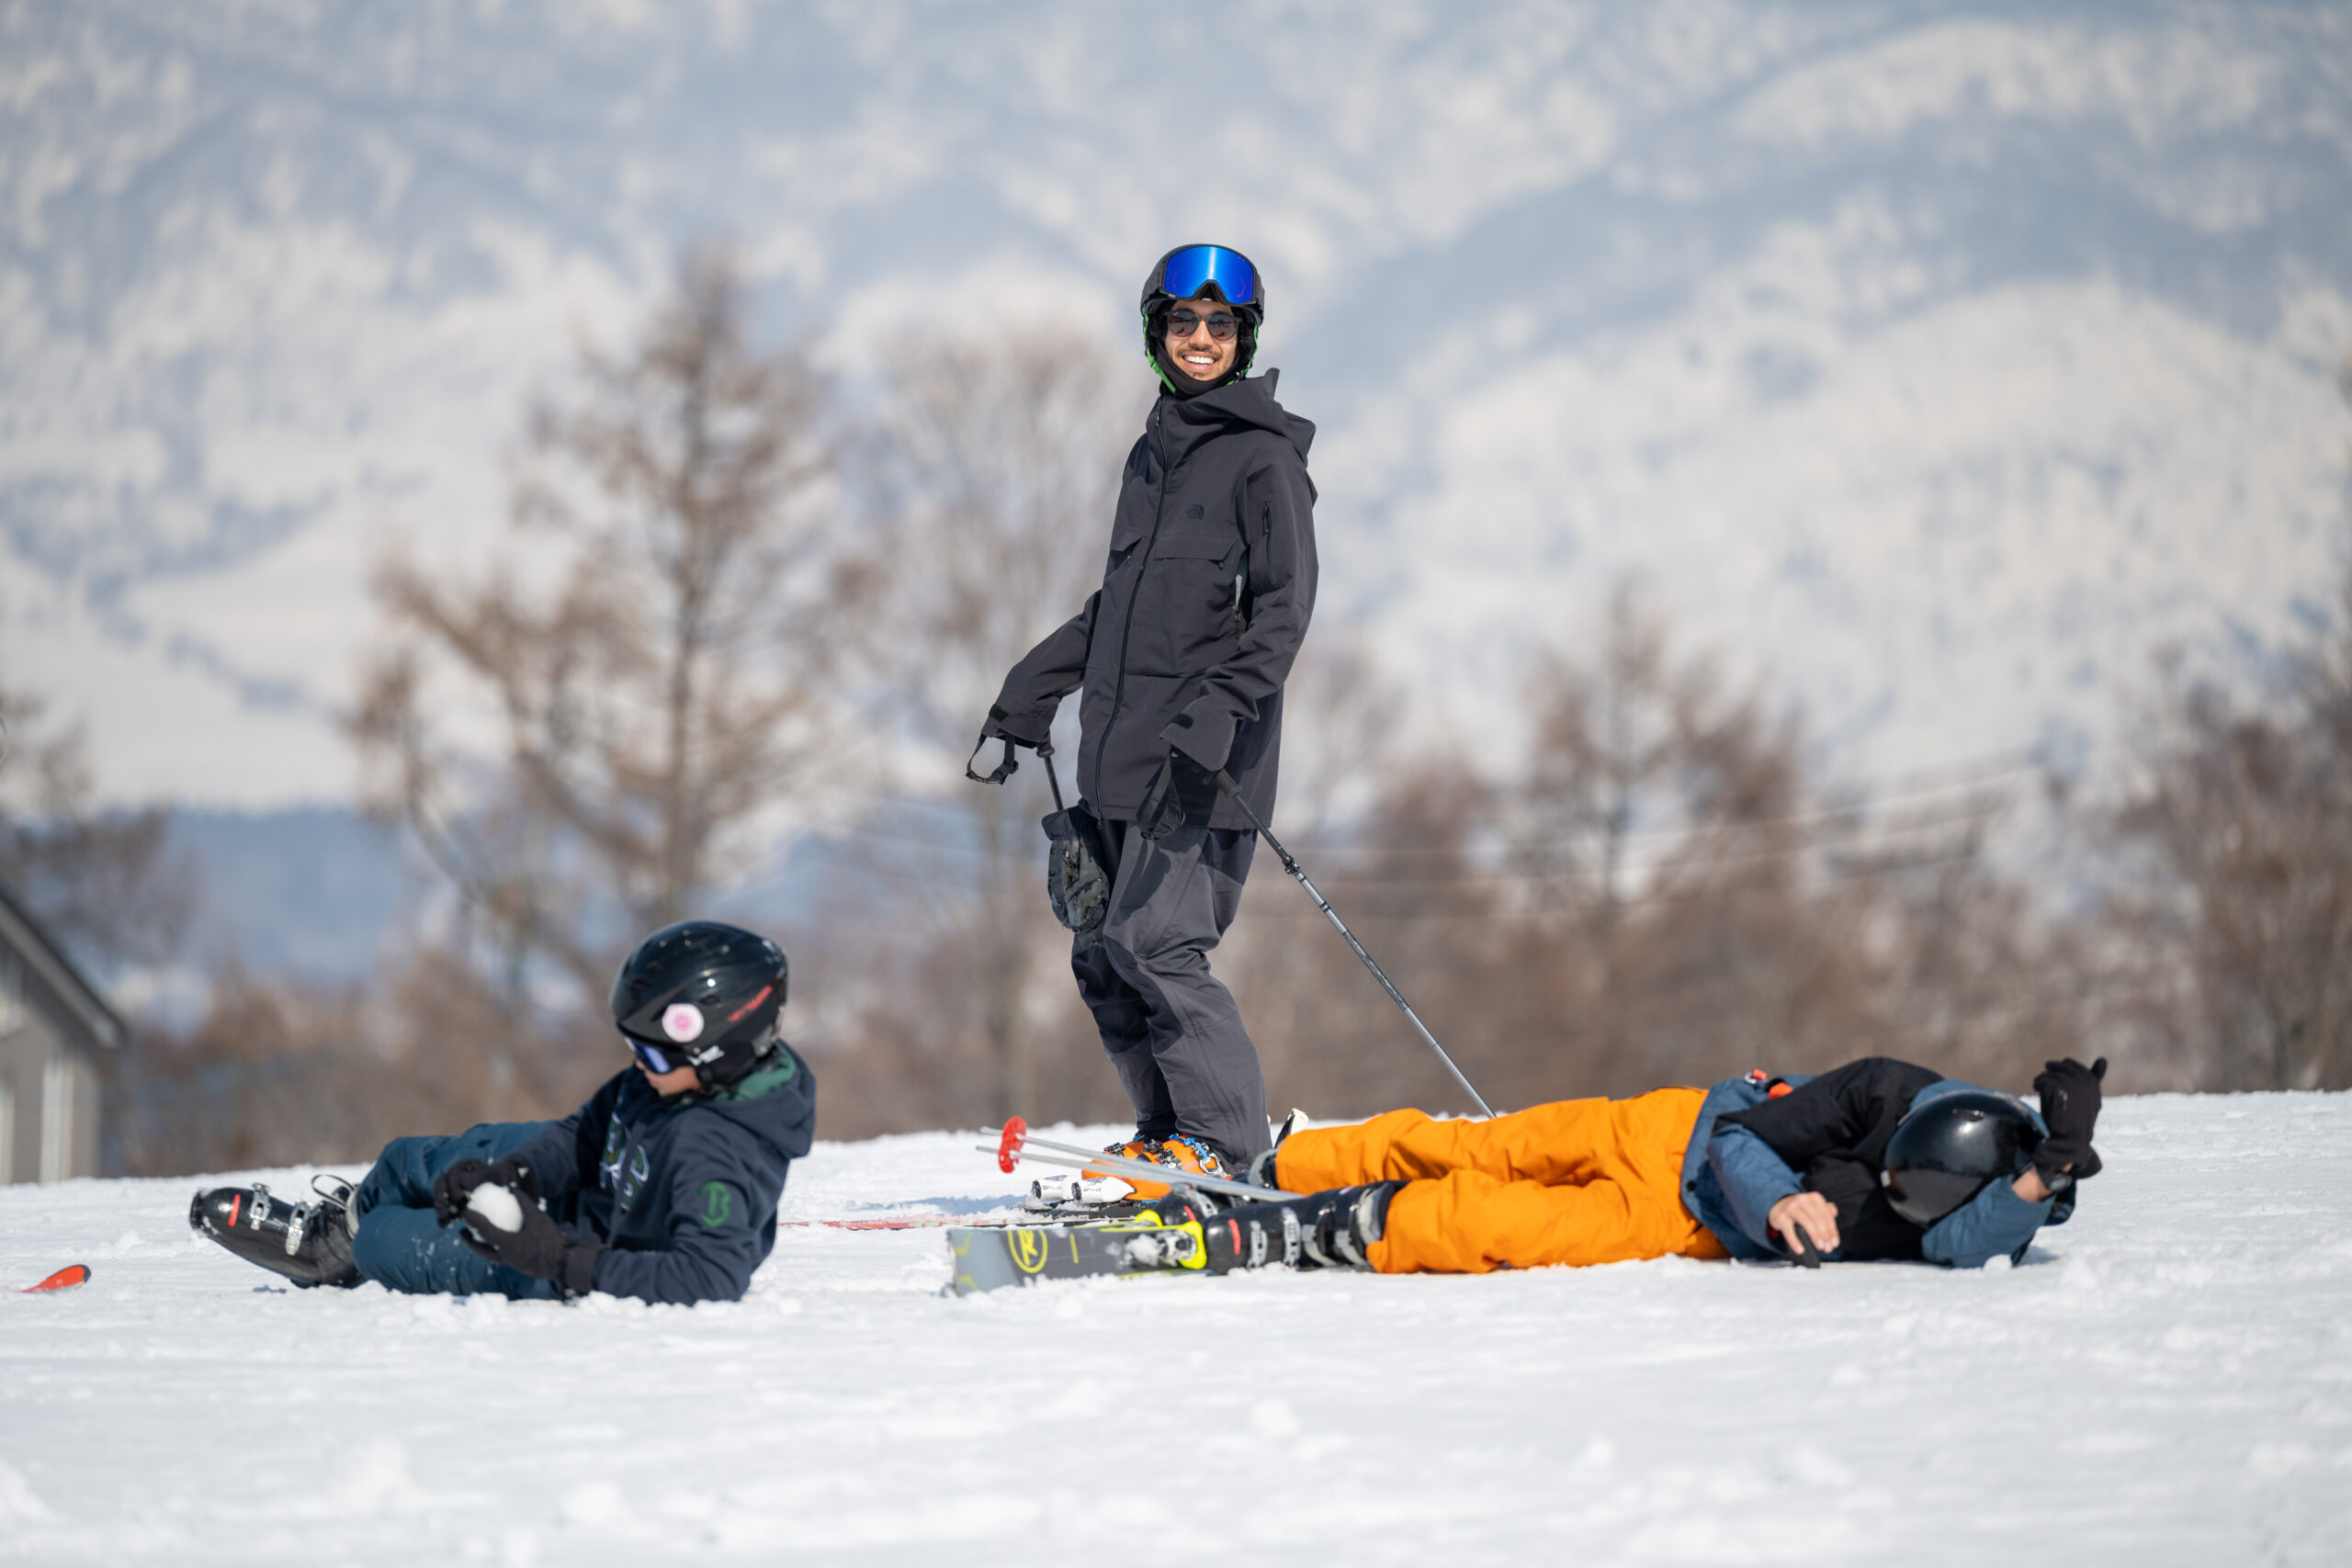 Discovering Nozawa Onsen’s Hidden Gems: Adventures and Snowboard Lessons